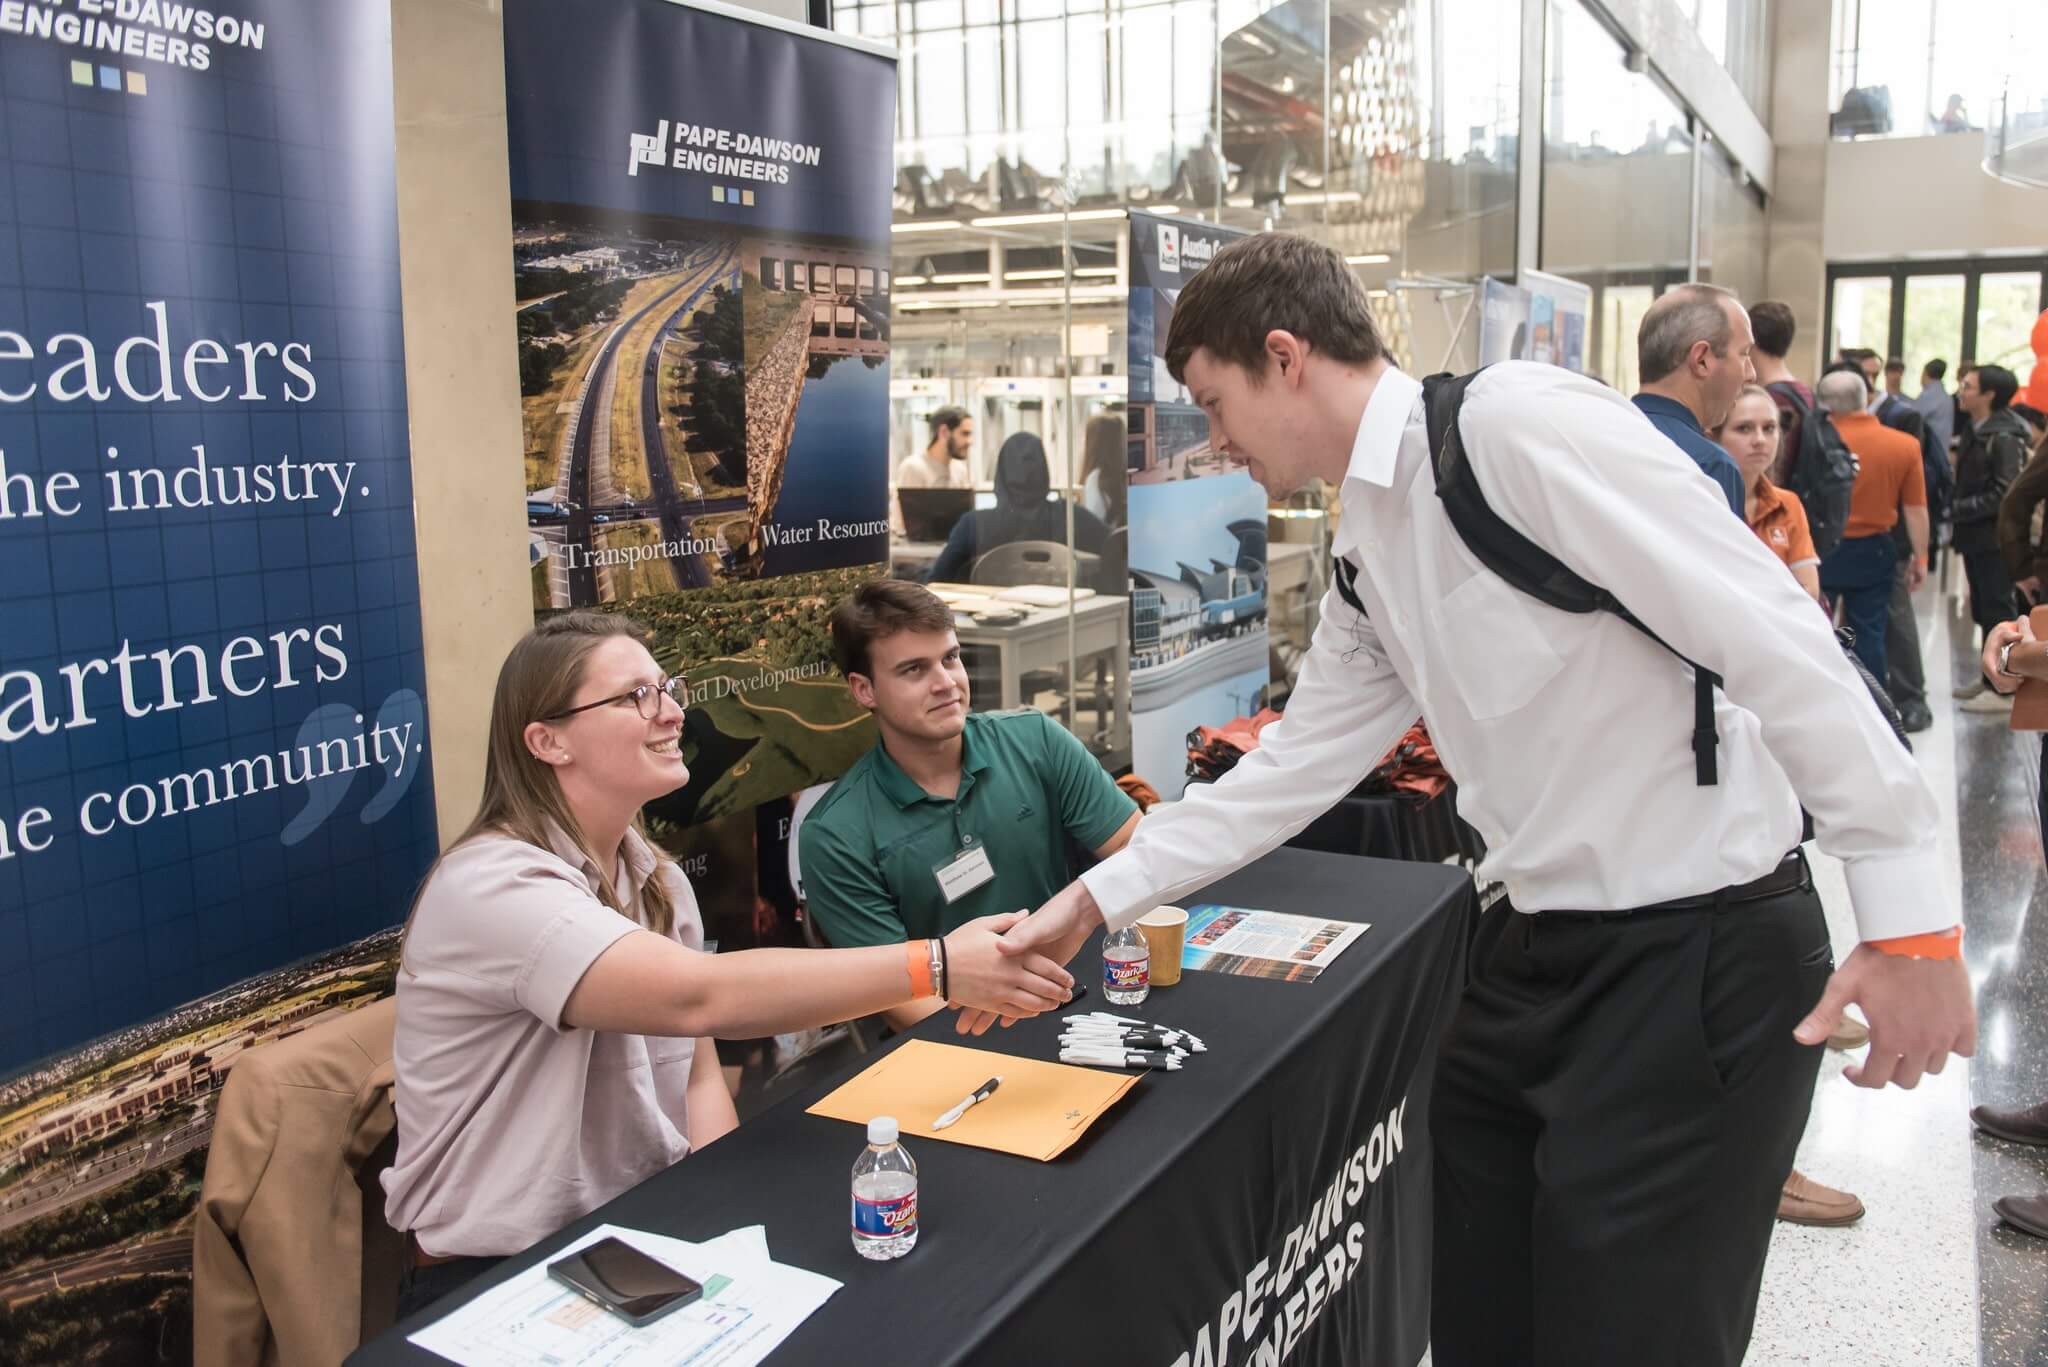 Texas Engineering student shaking hands with industry representatives at an industry open house event